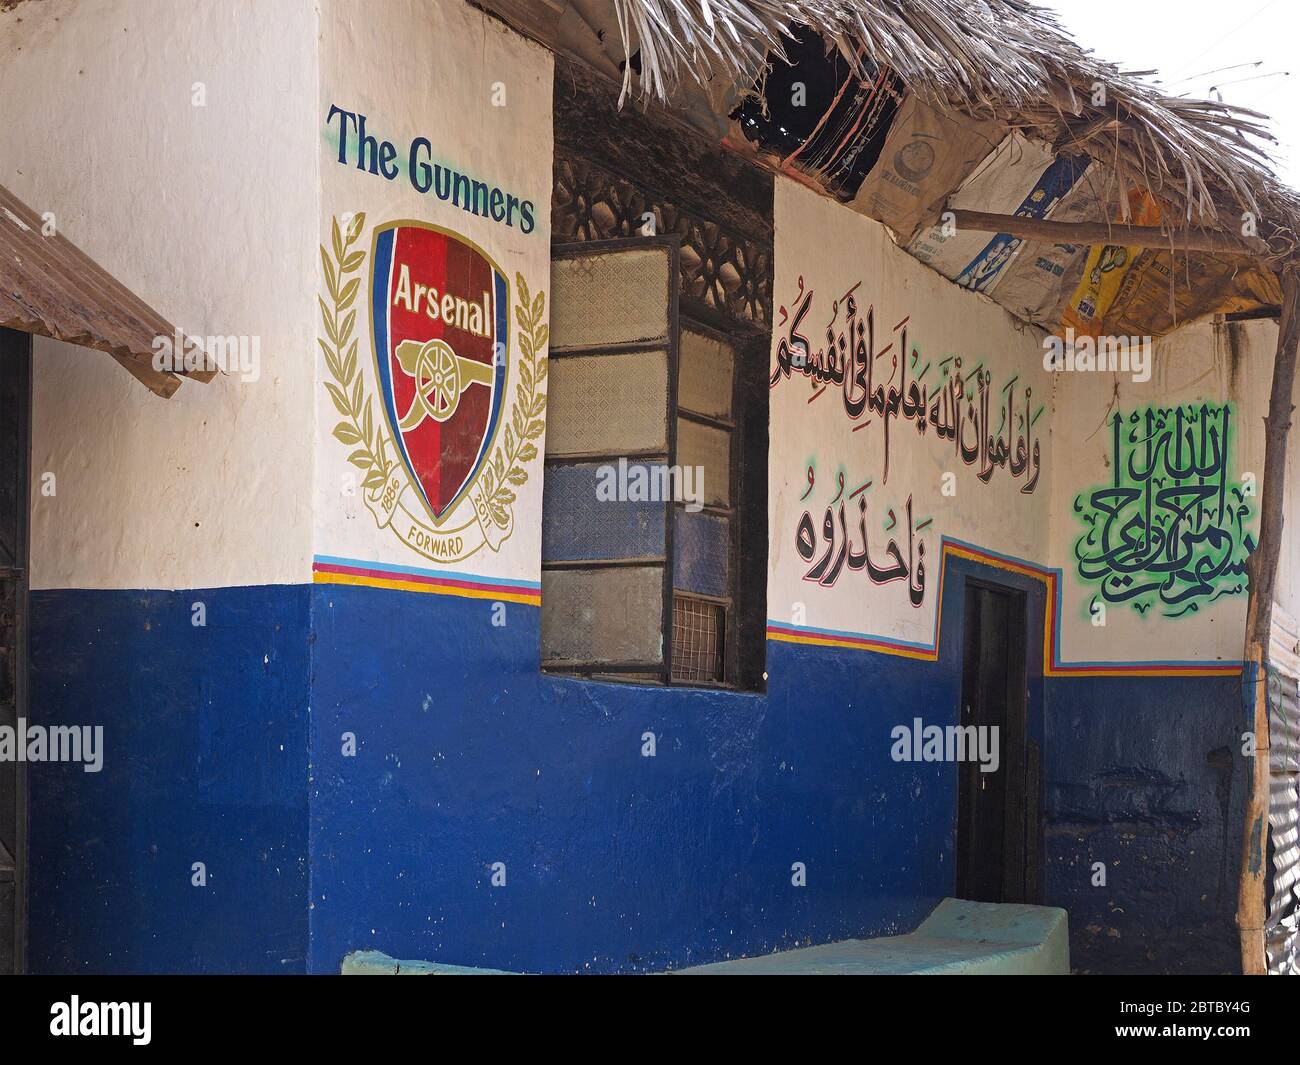 Arsenal crest and signage alongside Arabic script on painted walls of a small shop in the Old Town district of Malindi,on the Kenya coast, Africa Stock Photo